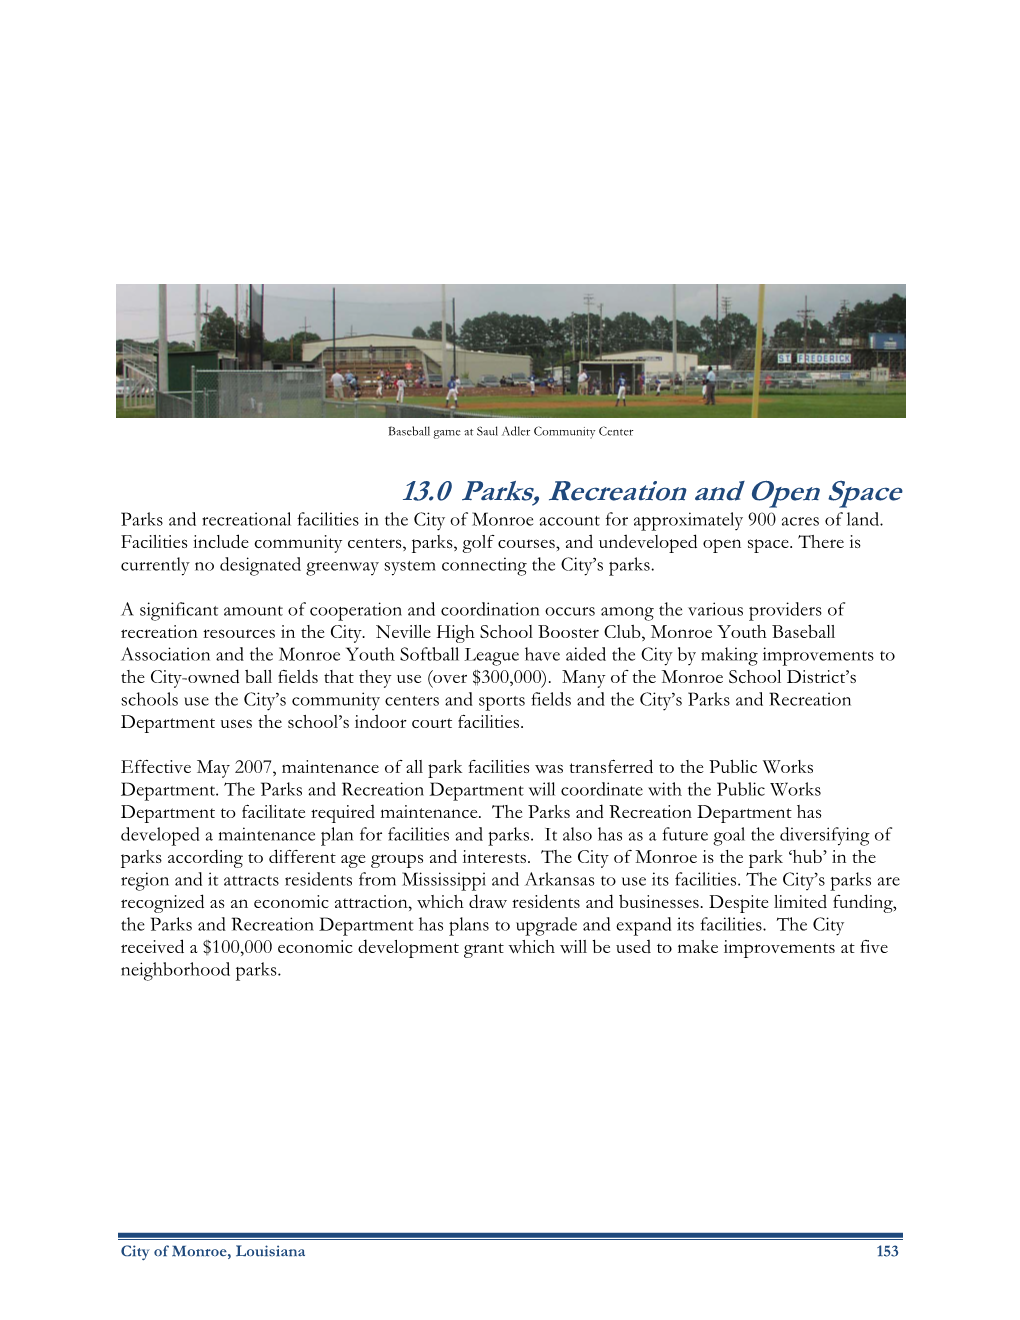 13.0 Parks, Recreation and Open Space Parks and Recreational Facilities in the City of Monroe Account for Approximately 900 Acres of Land